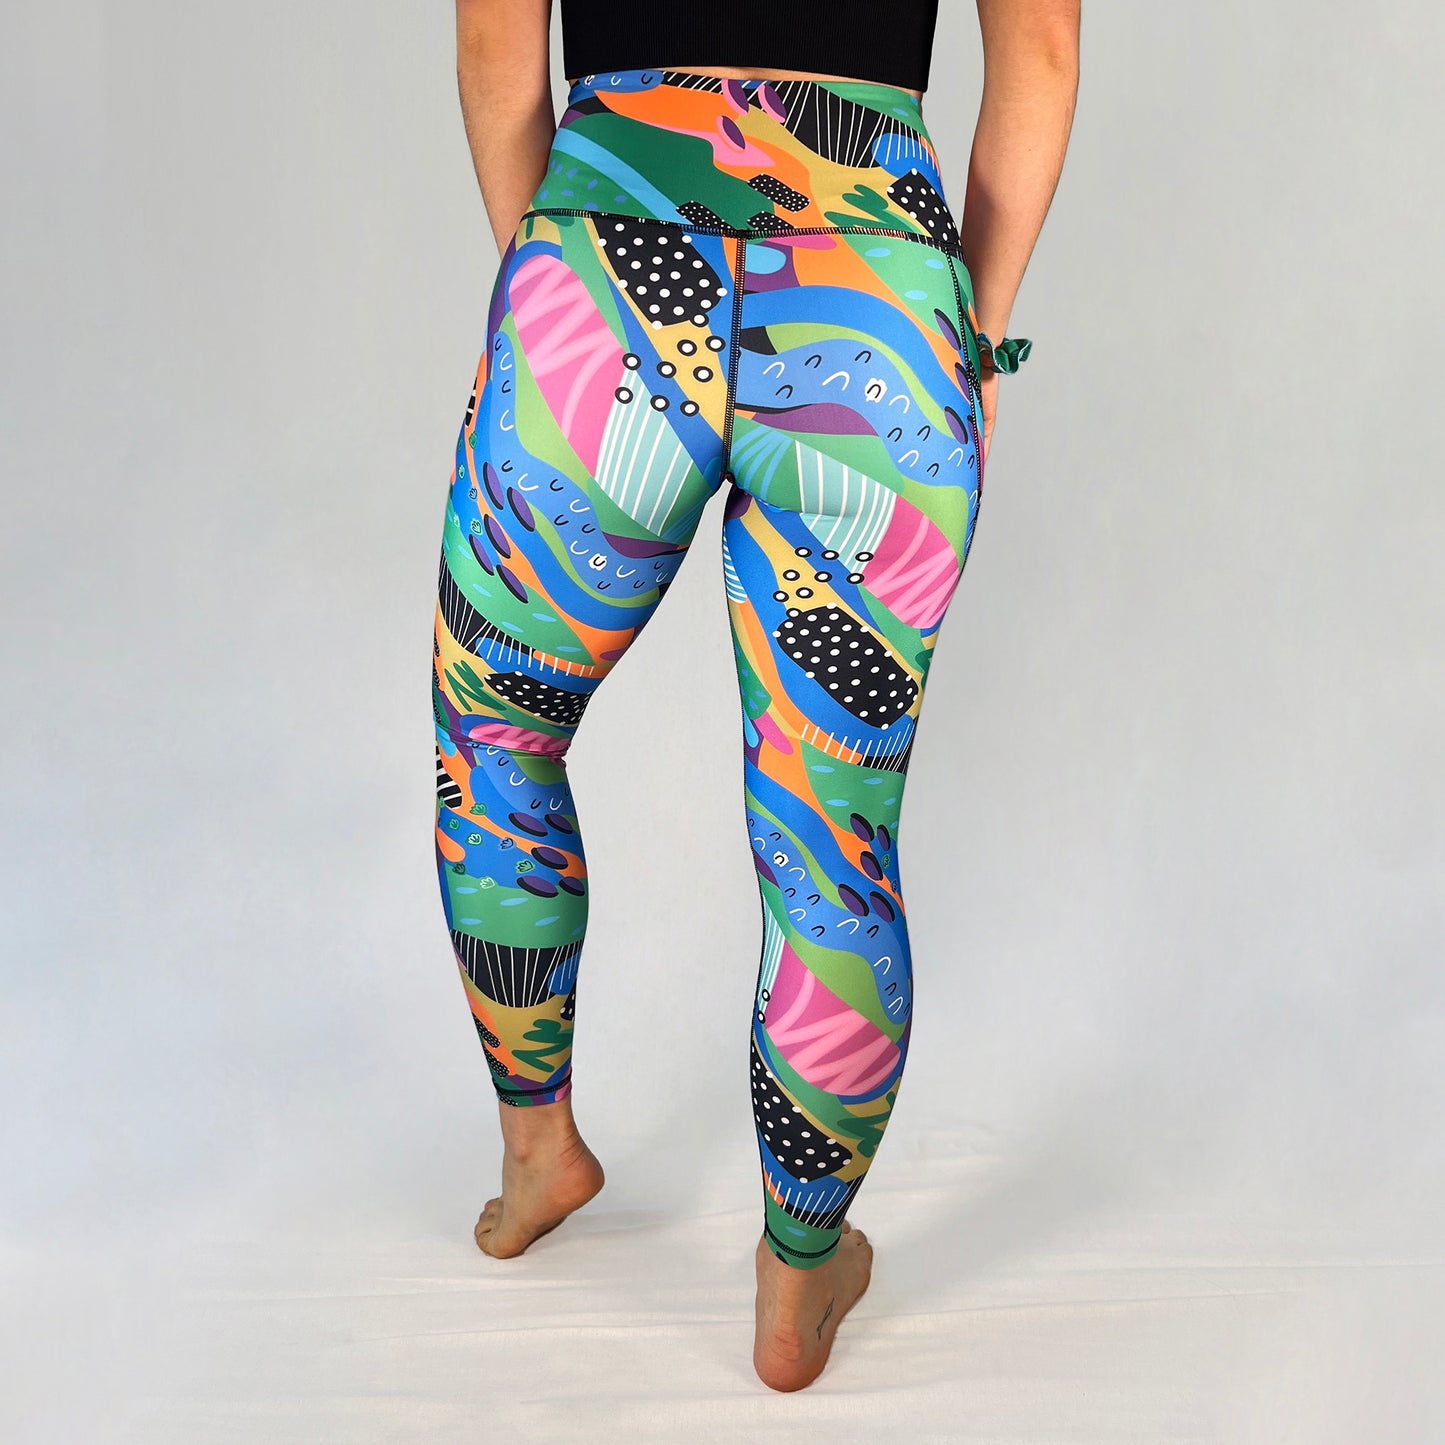 Back view of full-length leggings with pocket in Spark design by Art2Go Monique Baques